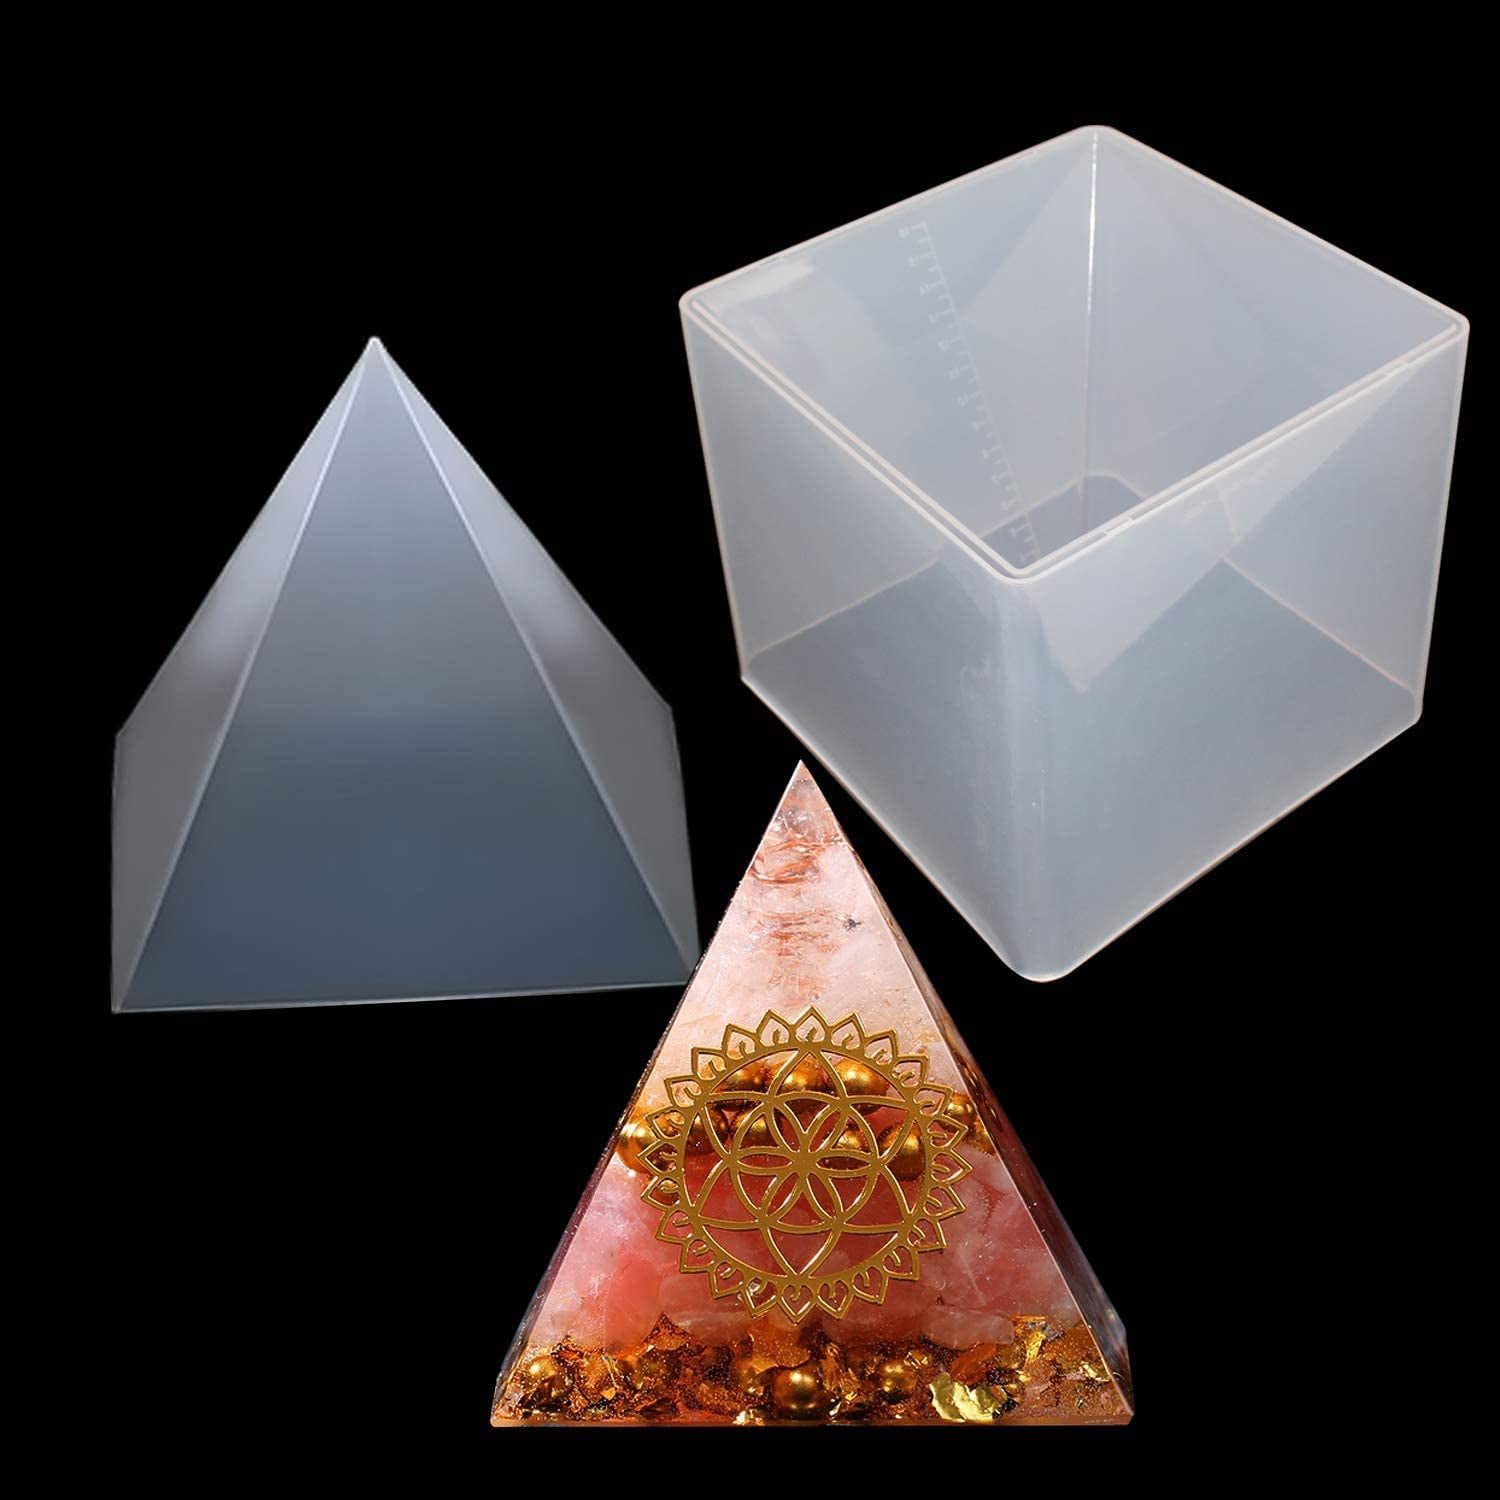 Large Pyramid Jewelry Mold Silicone Dried Flower Decor Resin DIY Craft Mould New 